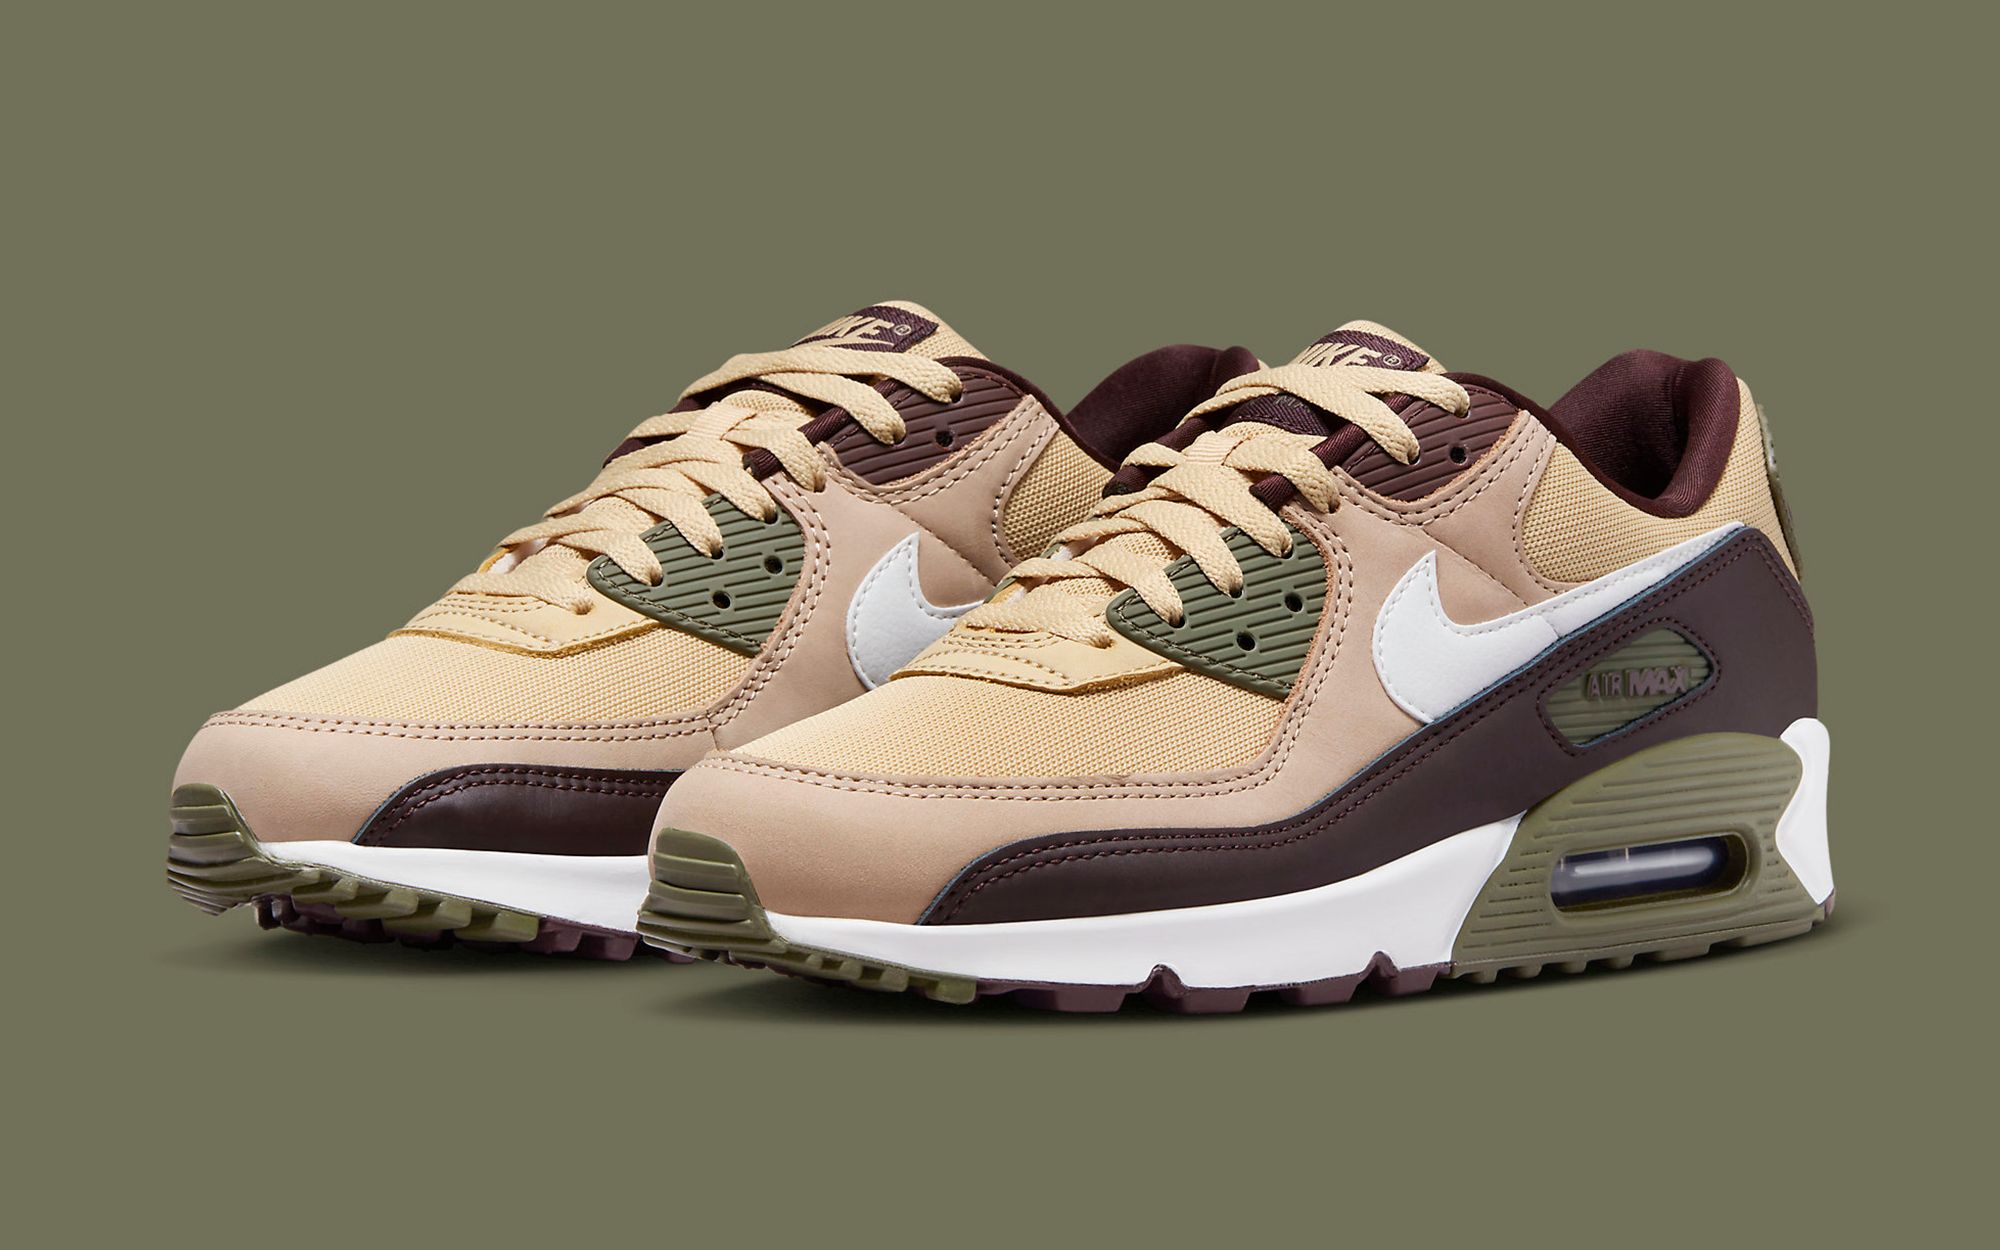 The Nike Air Max 90 Appears in Autumn-Aligned Hues | House of